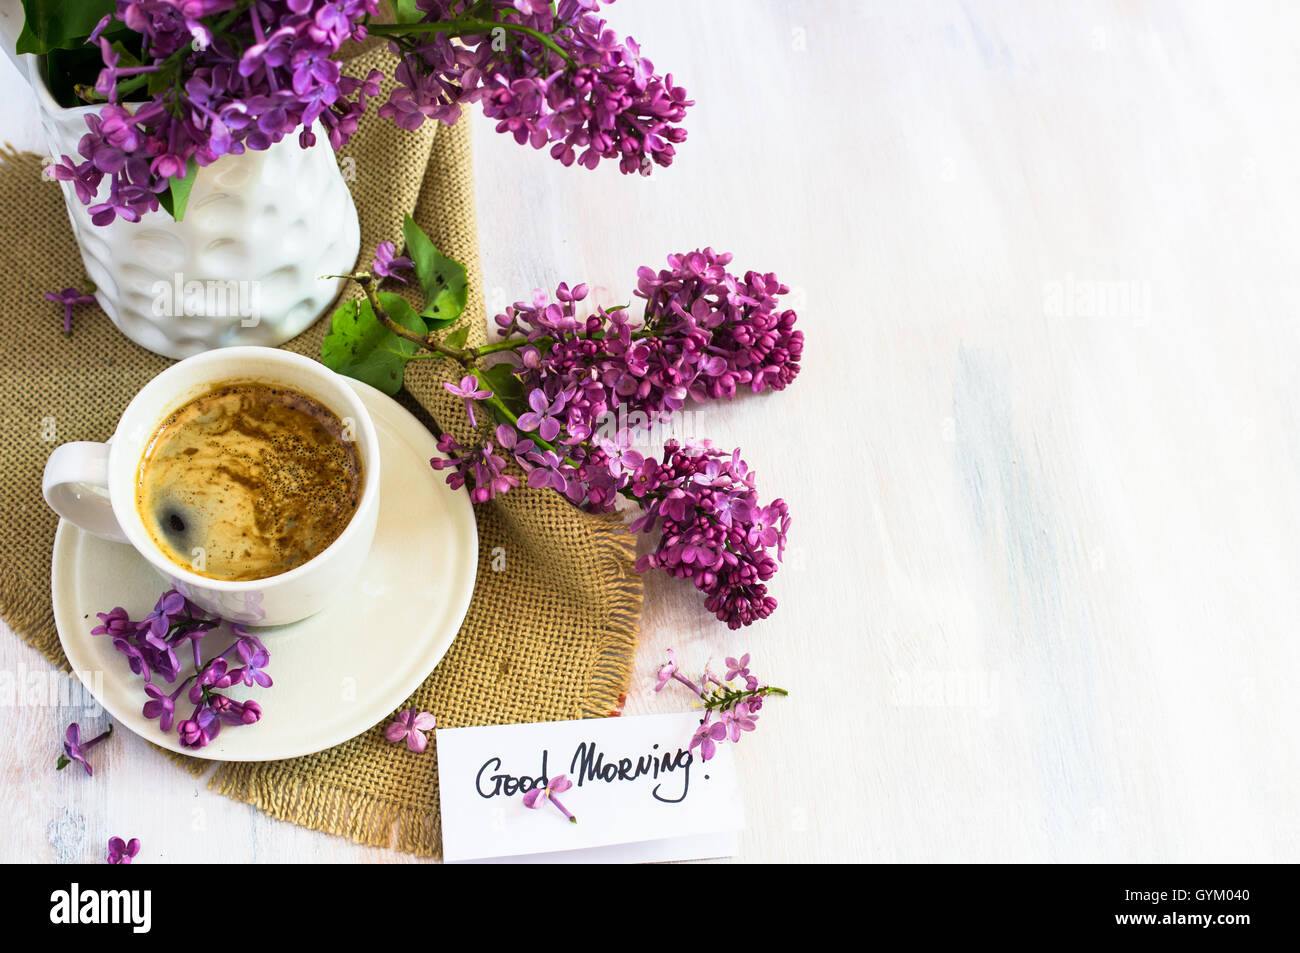 https://c8.alamy.com/comp/GYM040/lilac-flowers-and-cup-of-coffee-with-good-morning-note-on-rustic-wooden-GYM040.jpg